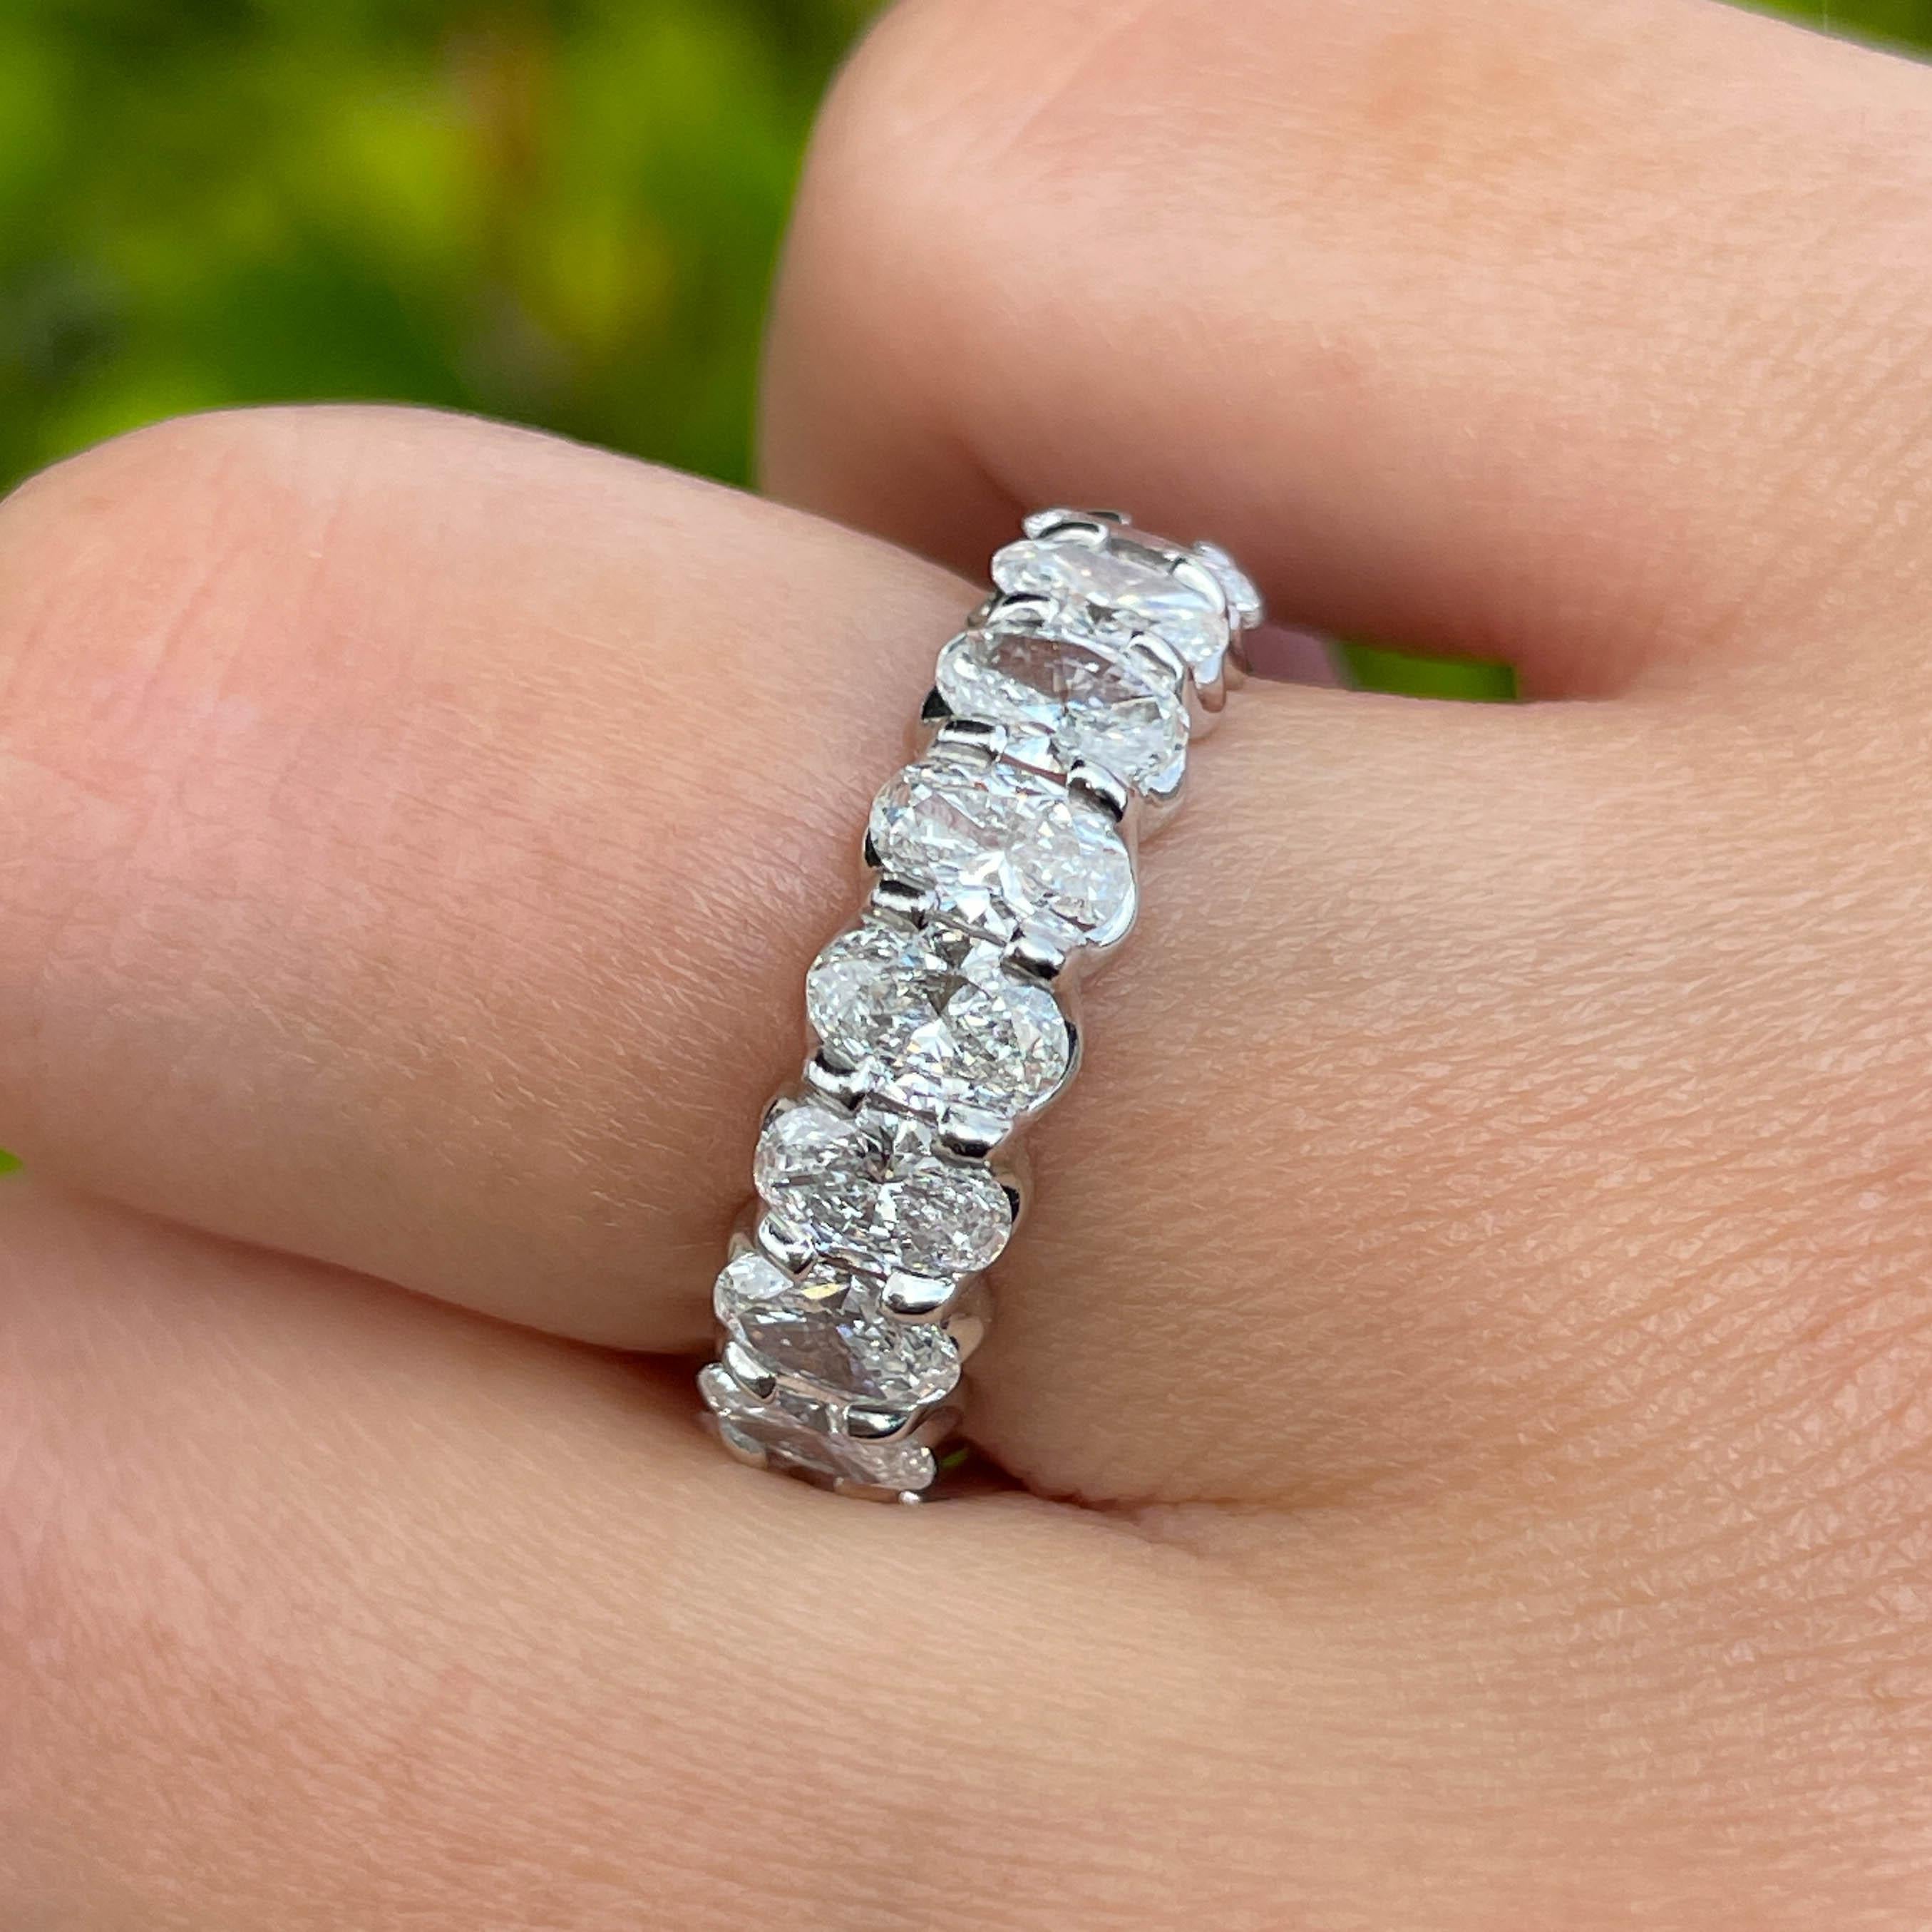 Jay Feder Platinum Oval Diamond Eternity Band Ring

Set with 18 oval brilliant diamonds in U shaped prong setting; total weight is 4.35ctw.

The band is 5.67mm wide; sits 2.95mm from the top of the finger. Ring size is 6 (not sizable). Total weight